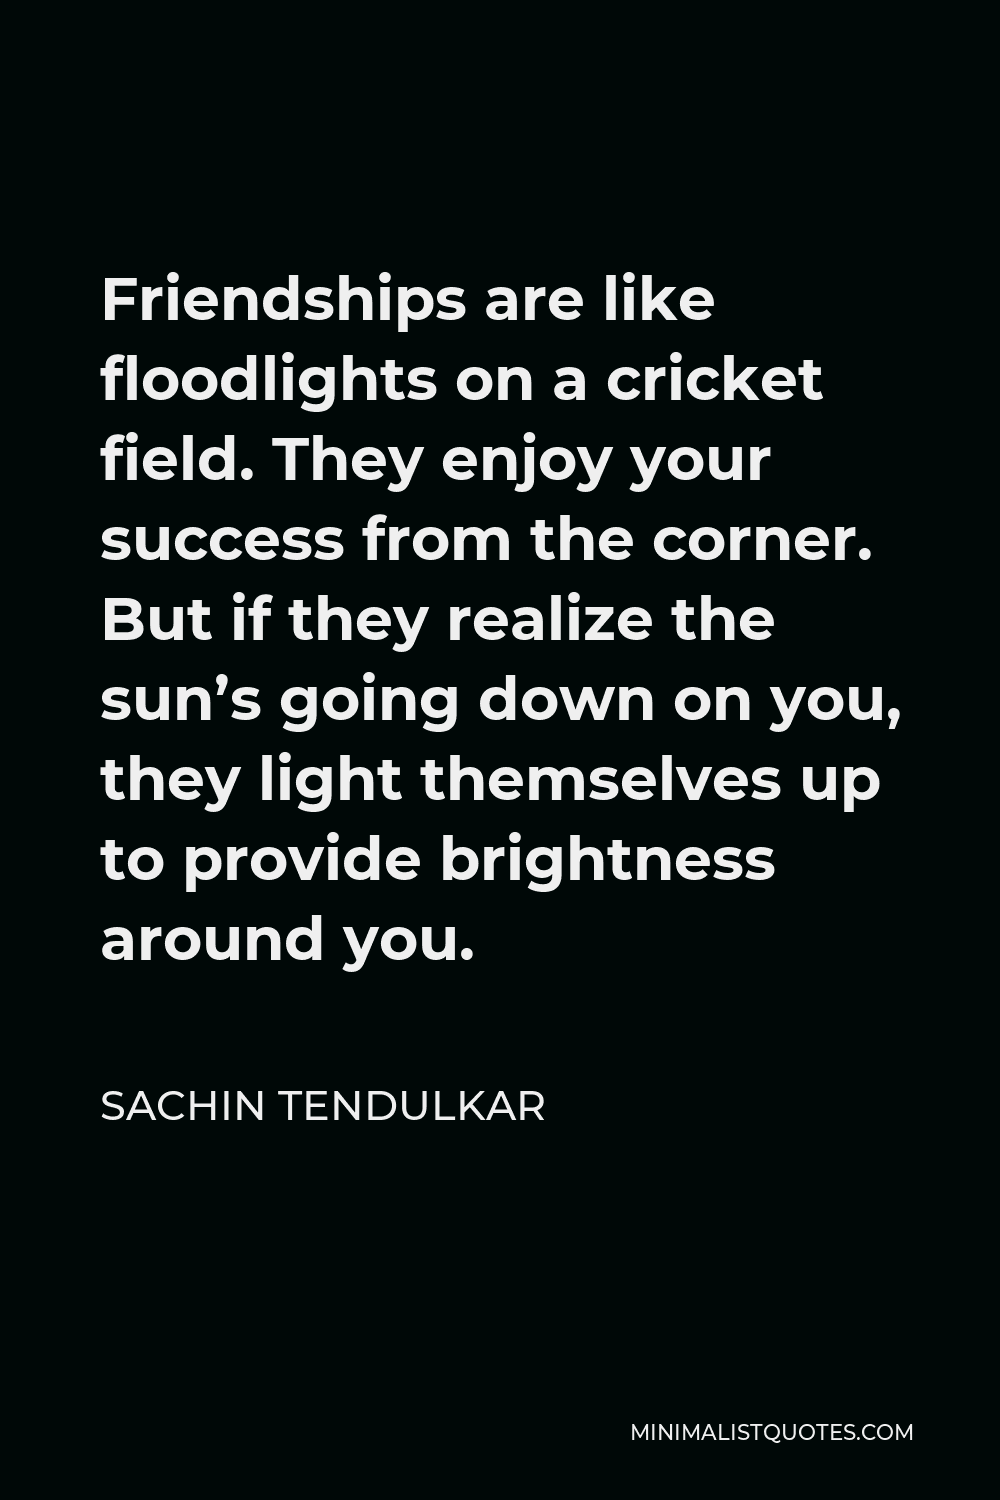 Sachin Tendulkar Quote - Friendships are like floodlights on a cricket field. They enjoy your success from the corner. But if they realize the sun’s going down on you, they light themselves up to provide brightness around you.